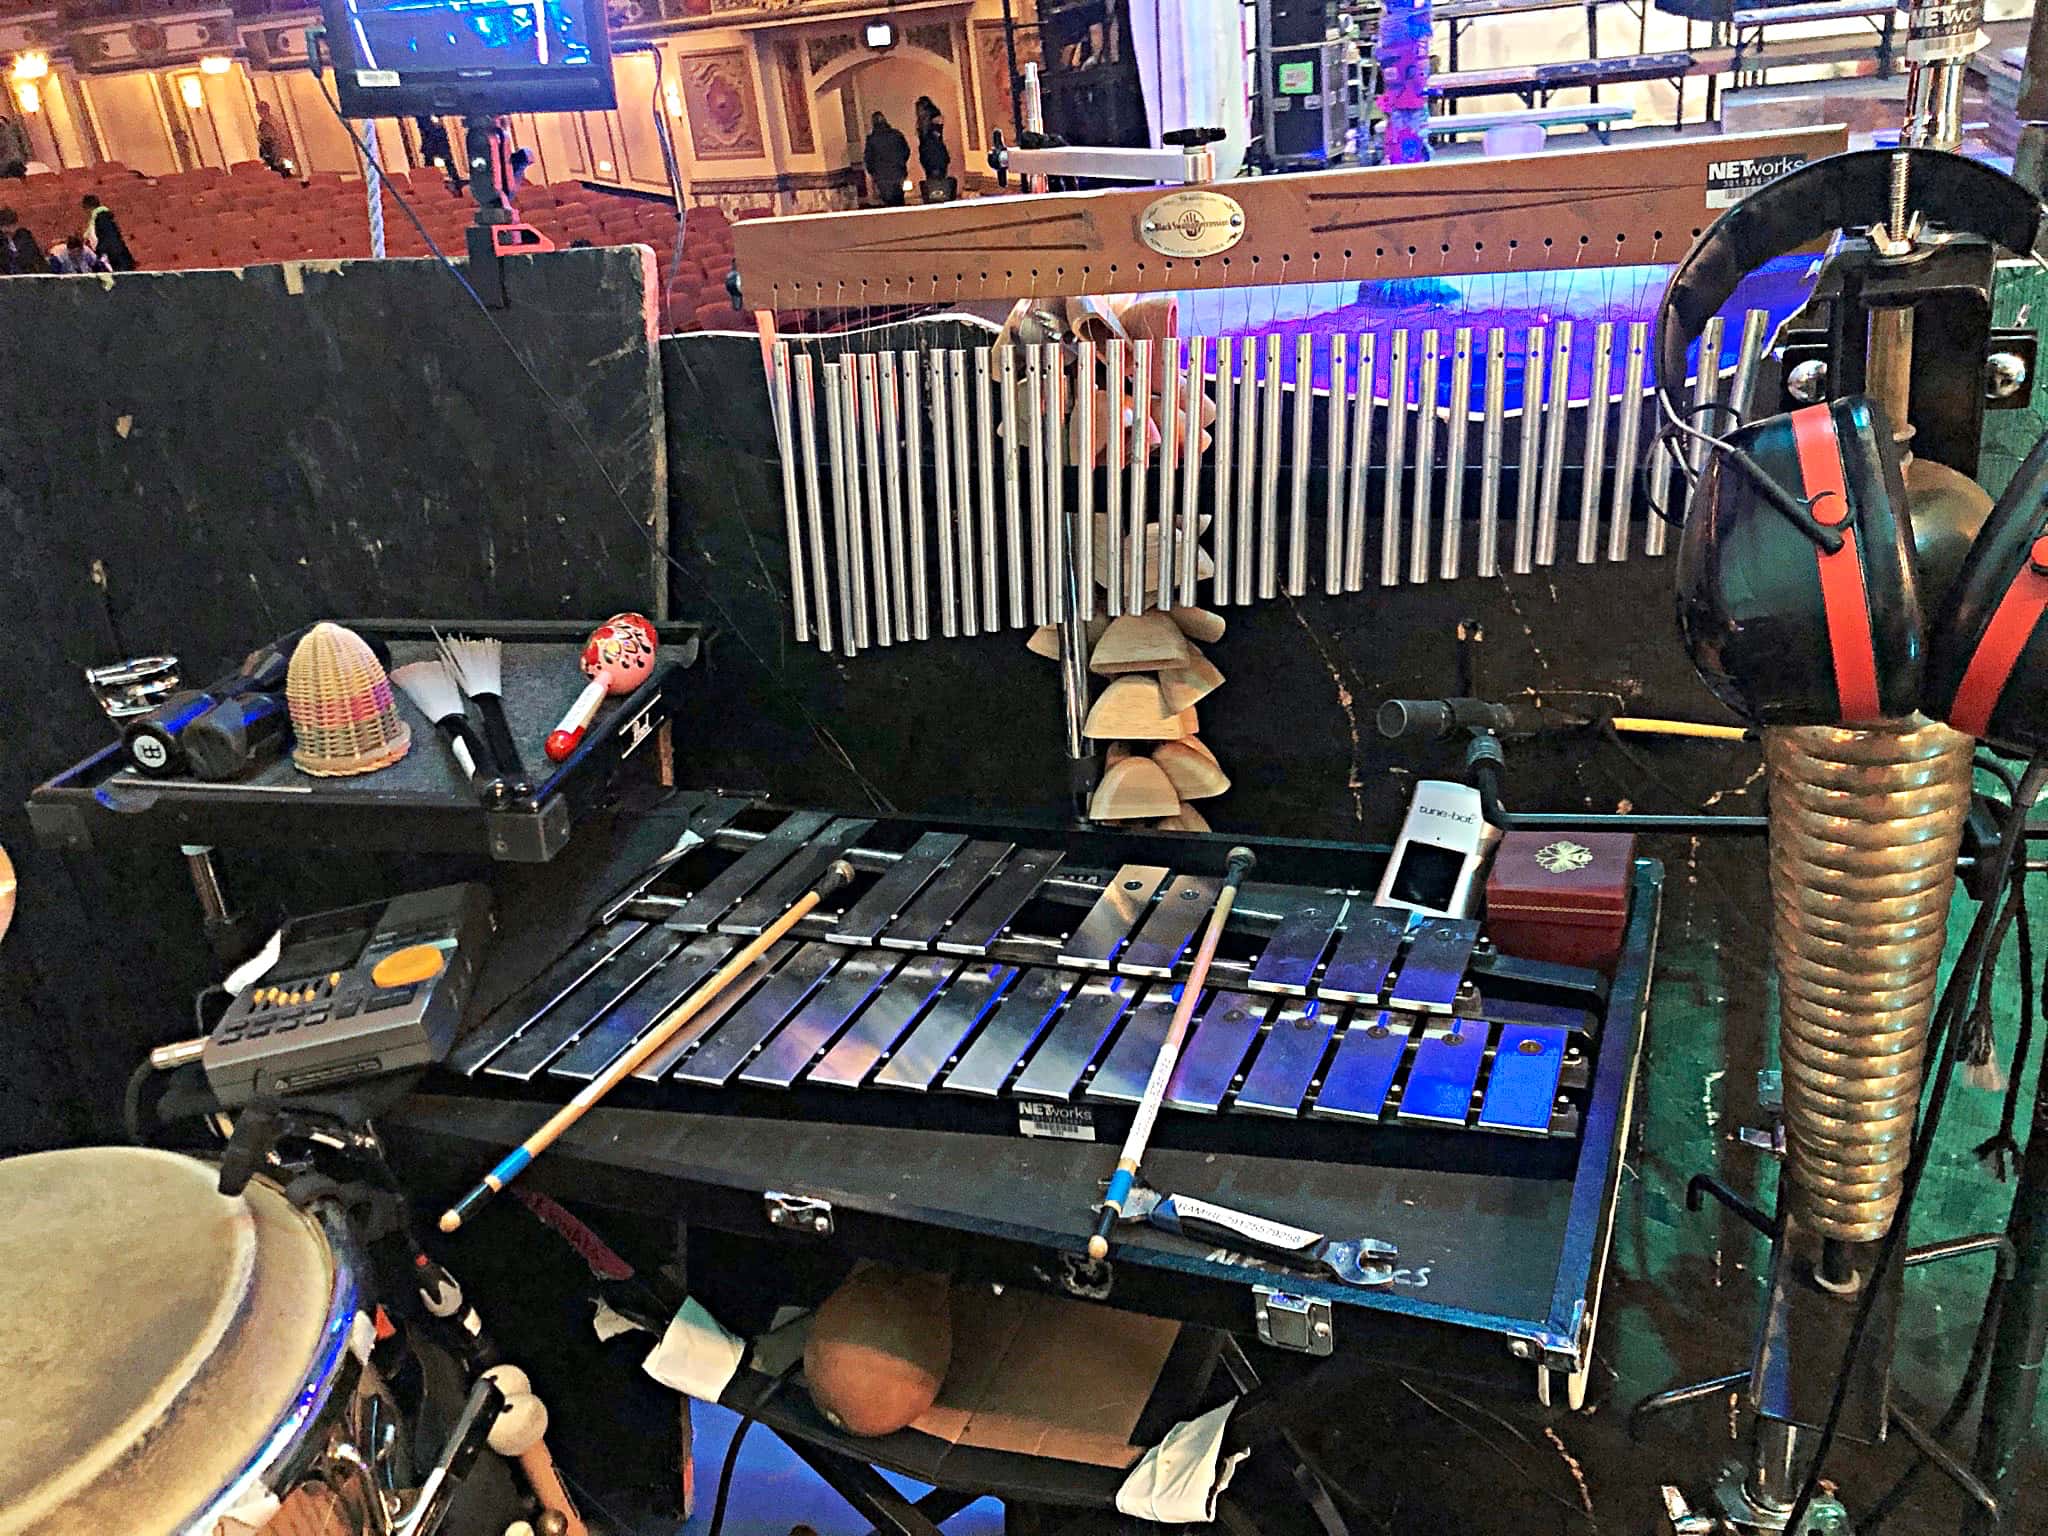 Mariana Ramirez's setup for the National Tour of Once On This Island at the Cadillac Palace Theatre in Chicago, Illinois.